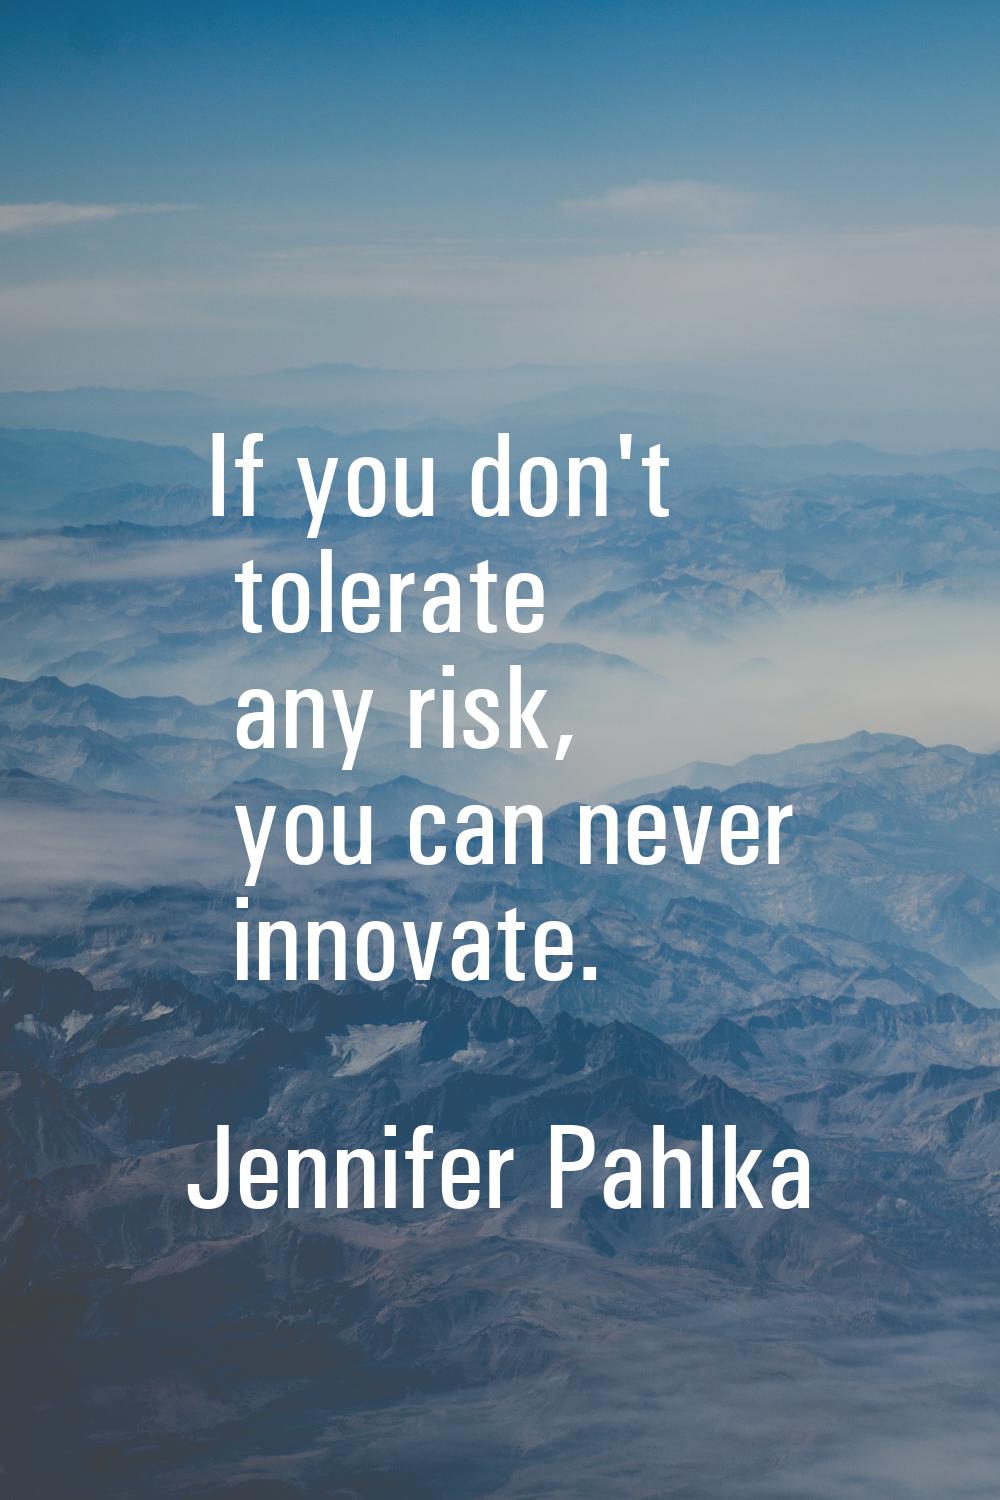 If you don't tolerate any risk, you can never innovate.